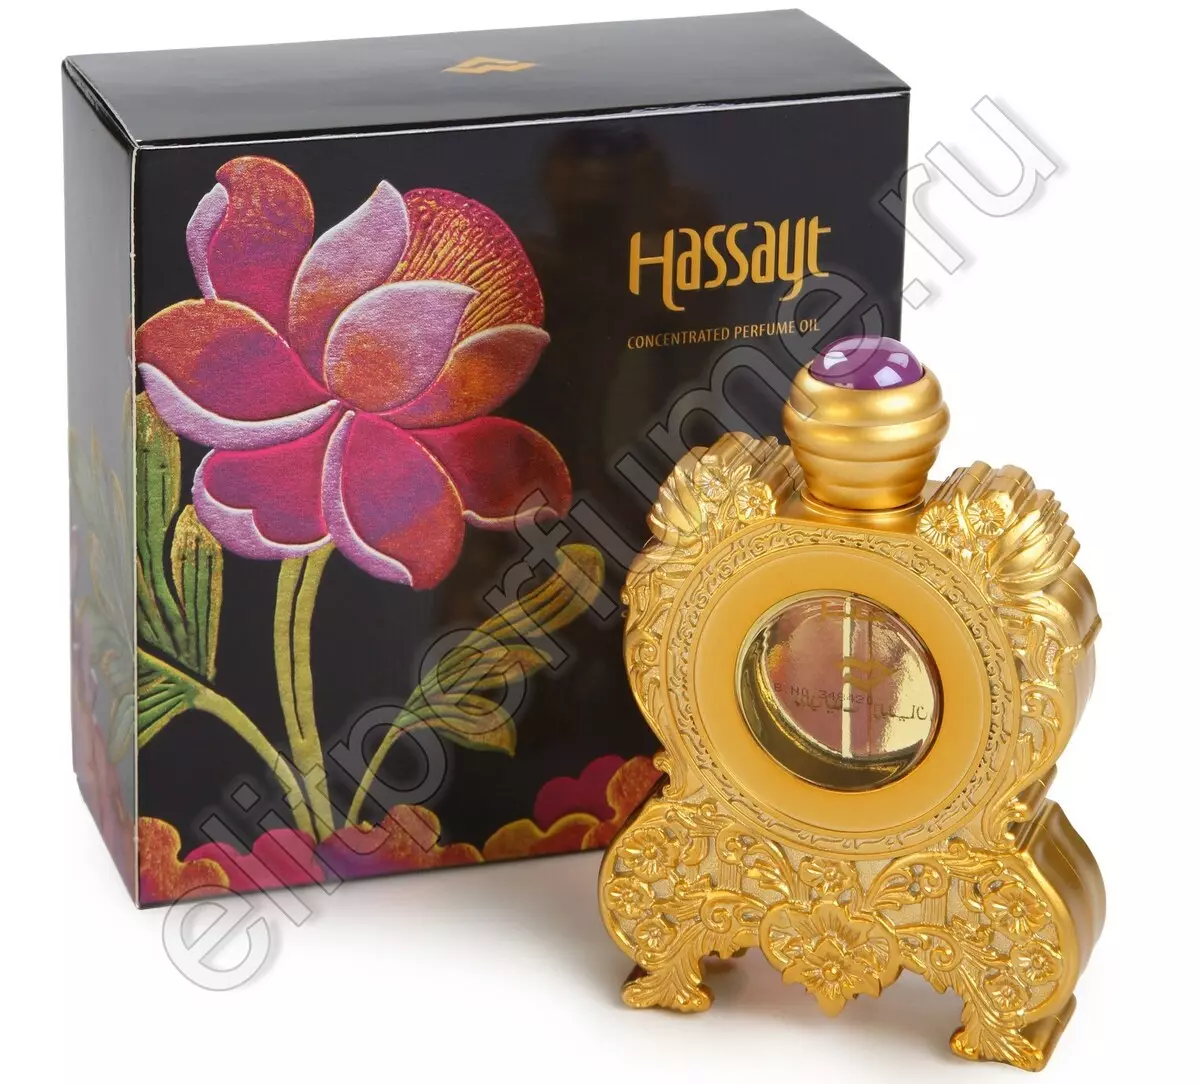 Turkish perfumes: perfume and cologne, colonid, toilet water and other perfumes from Turkey, overview of fragrances for men and women 23398_12